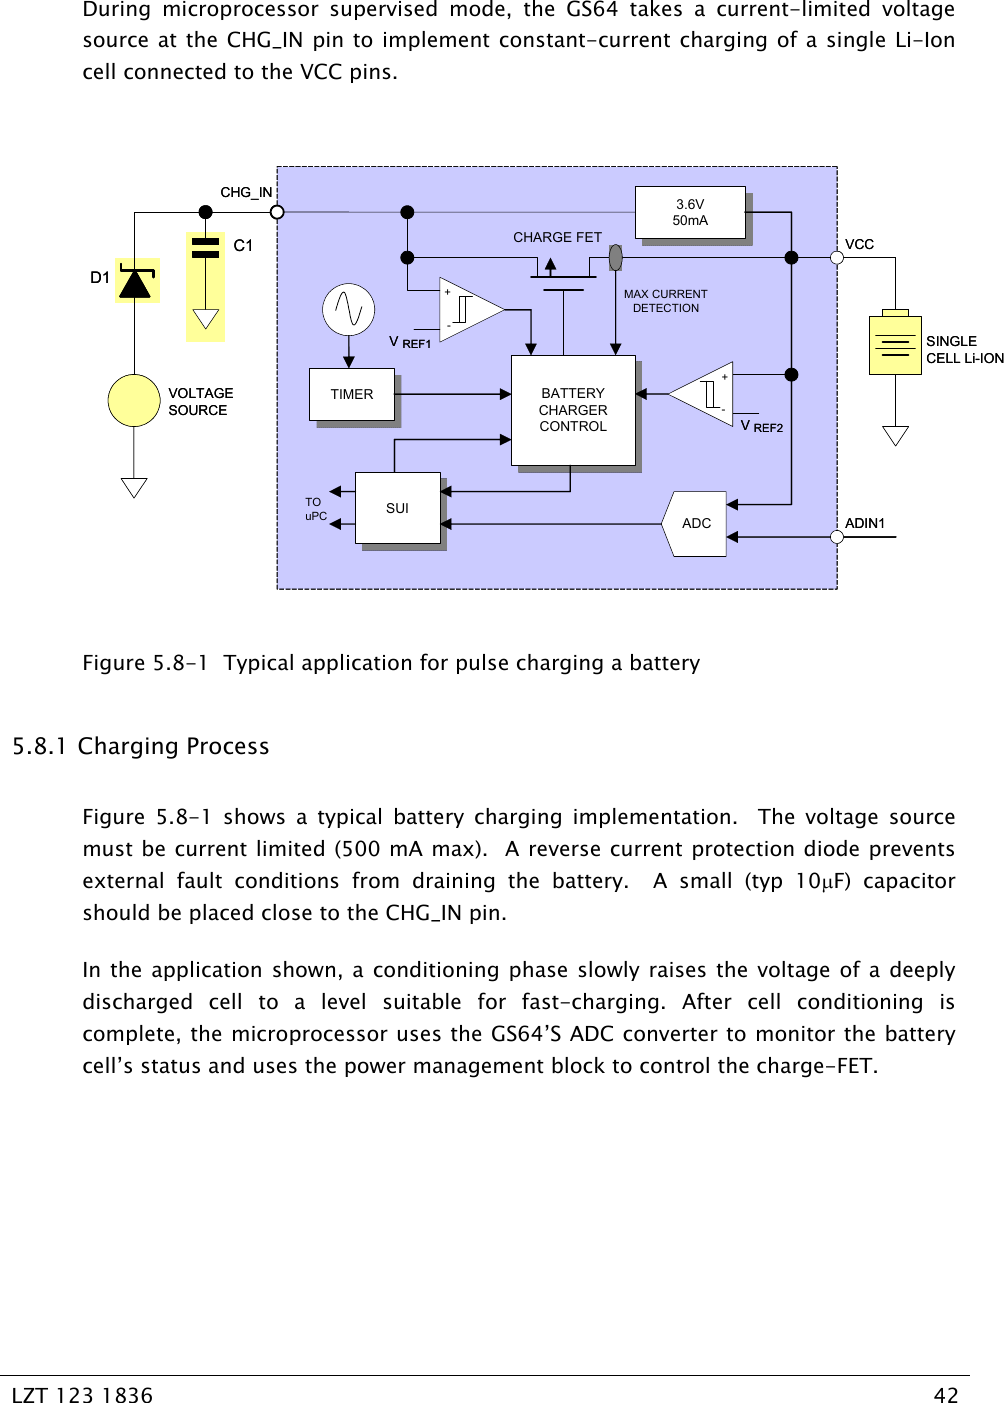   LZT 123 1836  42   During microprocessor supervised mode, the GS64 takes a current-limited voltage source at the CHG_IN pin to implement constant-current charging of a single Li-Ion cell connected to the VCC pins.  BATTERYCHARGERCONTROLBATTERYCHARGERCONTROLTIMERTIMER+-3.6V50mA3.6V50mAMAX CURRENTDETECTIONADCSUISUITOuPCVREF1ADIN1C1VREF2VCCSINGLECELL Li-IONVOLTAGESOURCECHG_IND1CHARGE FET+-BATTERYCHARGERCONTROLBATTERYCHARGERCONTROLTIMERTIMER+-3.6V50mA3.6V50mAMAX CURRENTDETECTIONADCSUISUITOuPCVREF1VREF1ADIN1C1VREF2VREF2VCCSINGLECELL Li-IONVOLTAGESOURCECHG_IND1CHARGE FET+-Figure 5.8-1  Typical application for pulse charging a battery 5.8.1  Charging Process Figure 5.8-1 shows a typical battery charging implementation.  The voltage source must be current limited (500 mA max).  A reverse current protection diode prevents external fault conditions from draining the battery.  A small (typ 10µF) capacitor should be placed close to the CHG_IN pin. In the application shown, a conditioning phase slowly raises the voltage of a deeply discharged cell to a level suitable for fast-charging. After cell conditioning is complete, the microprocessor uses the GS64’S ADC converter to monitor the battery cell’s status and uses the power management block to control the charge-FET.   